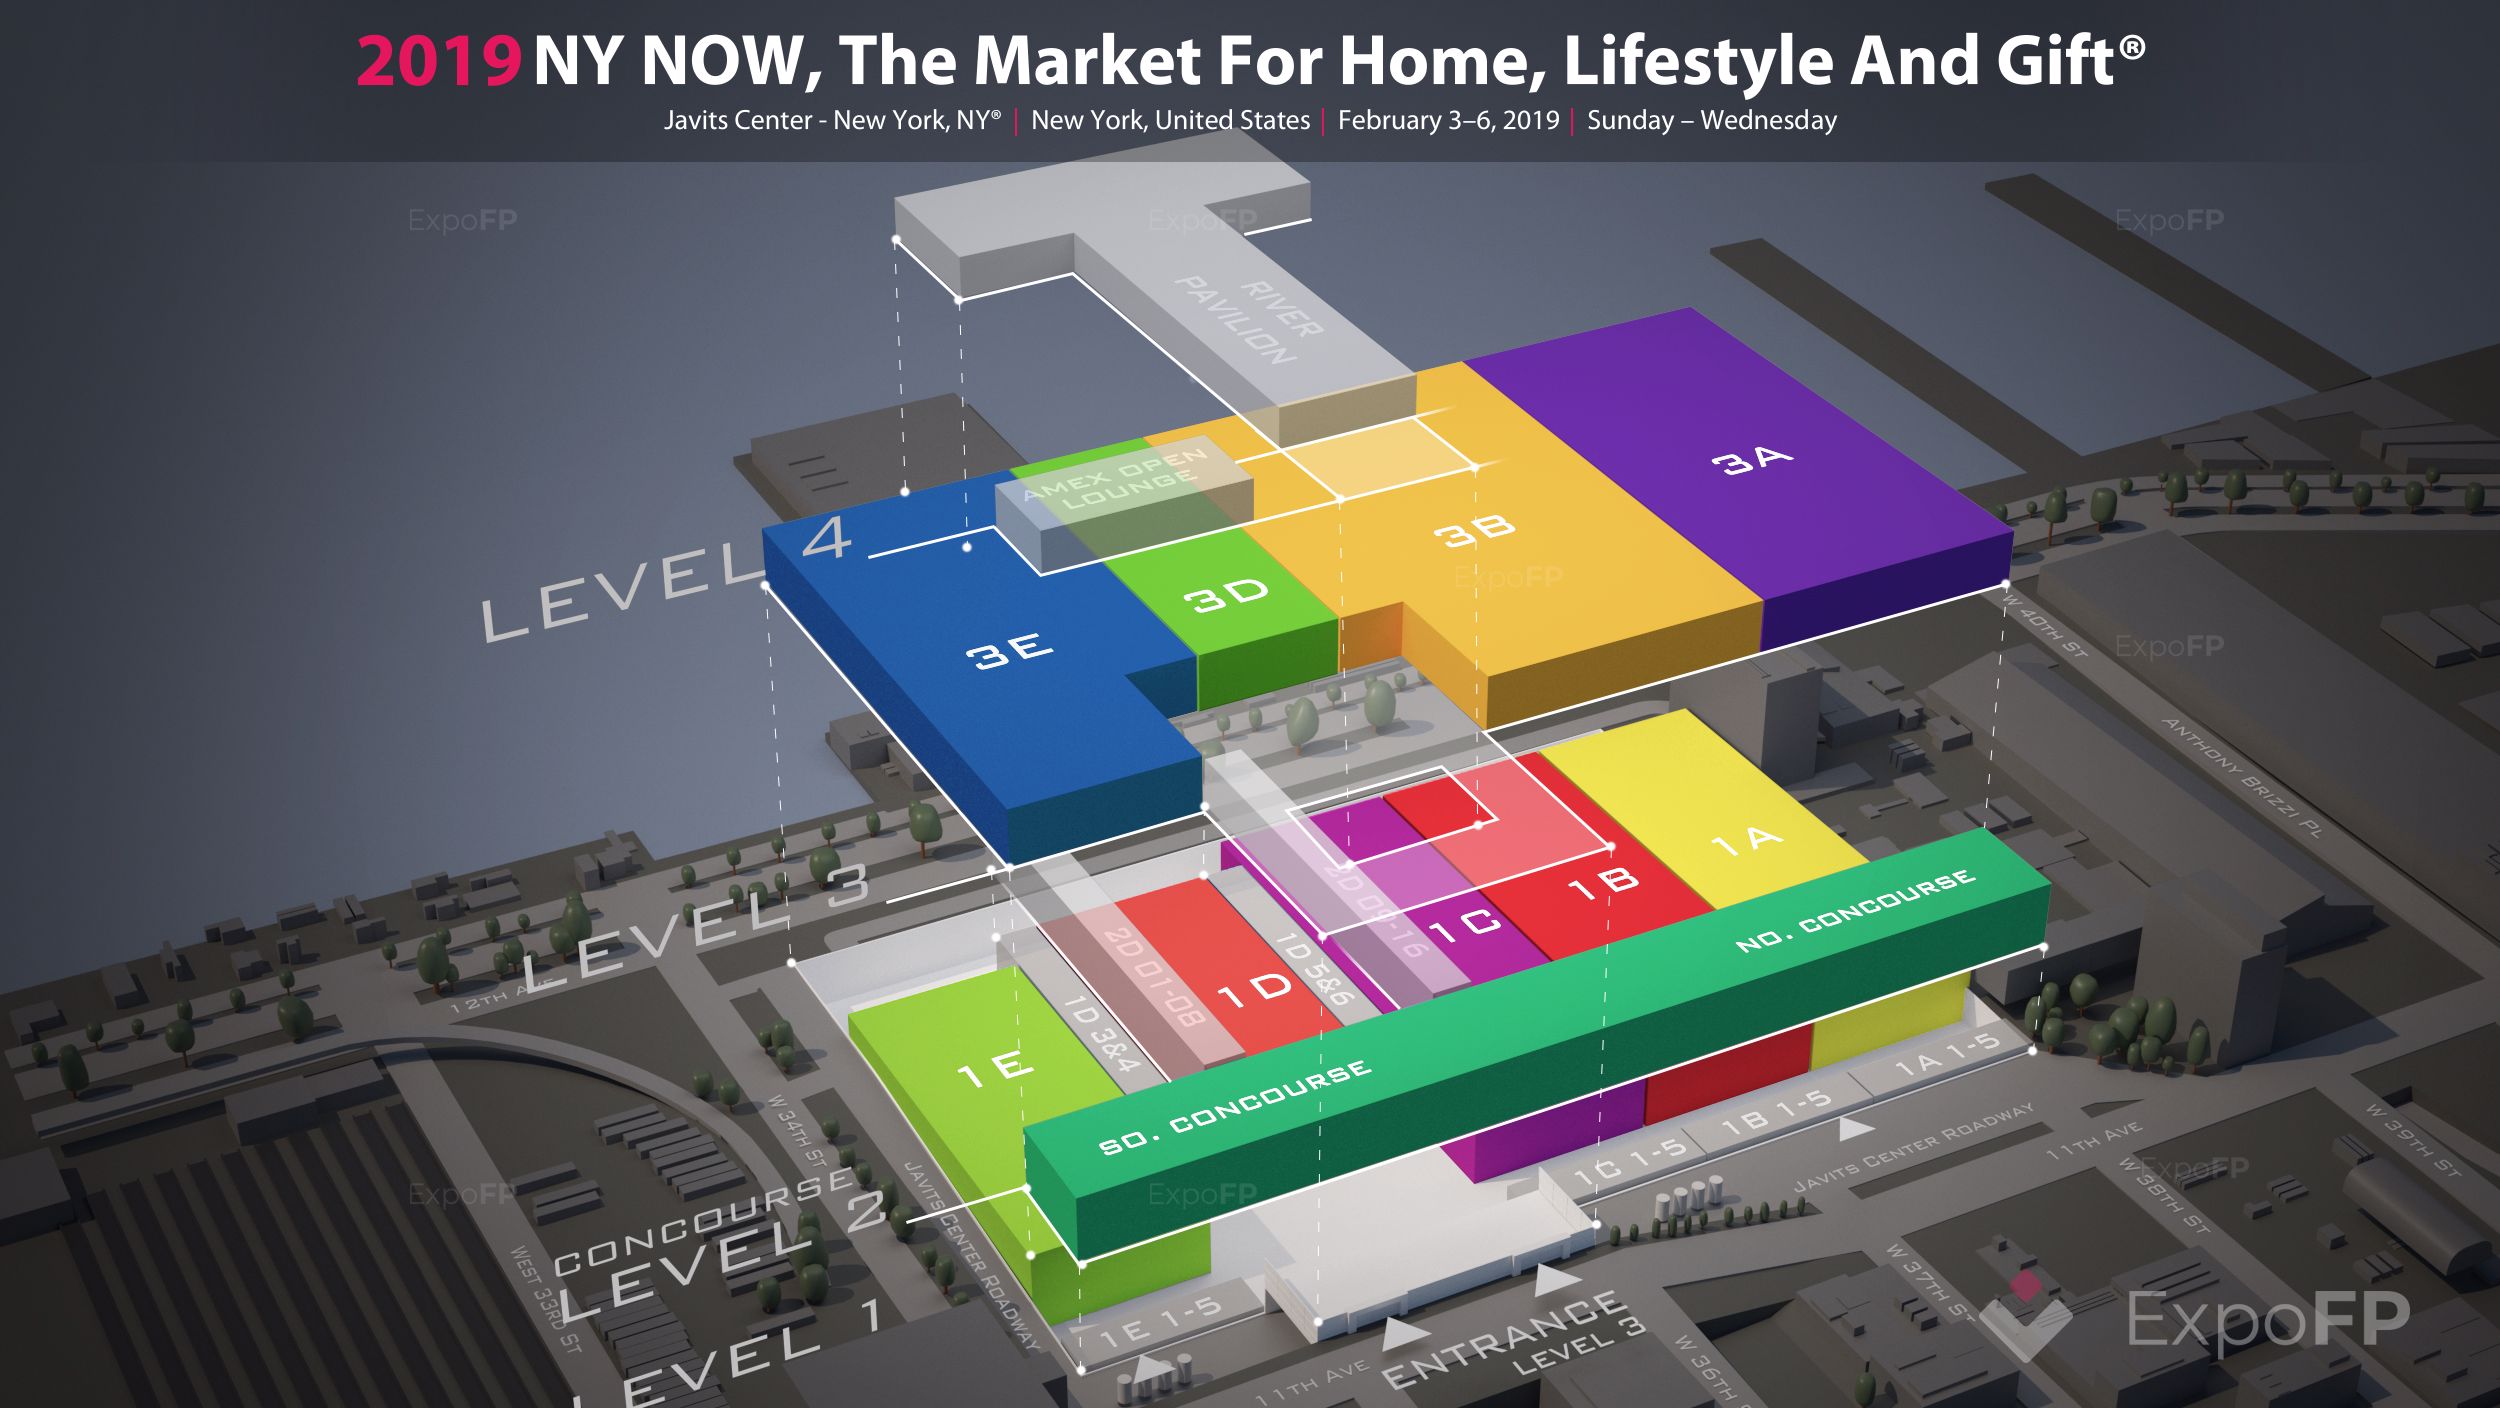 NY NOW, The Market for Home, Lifestyle and Gift 2019 in